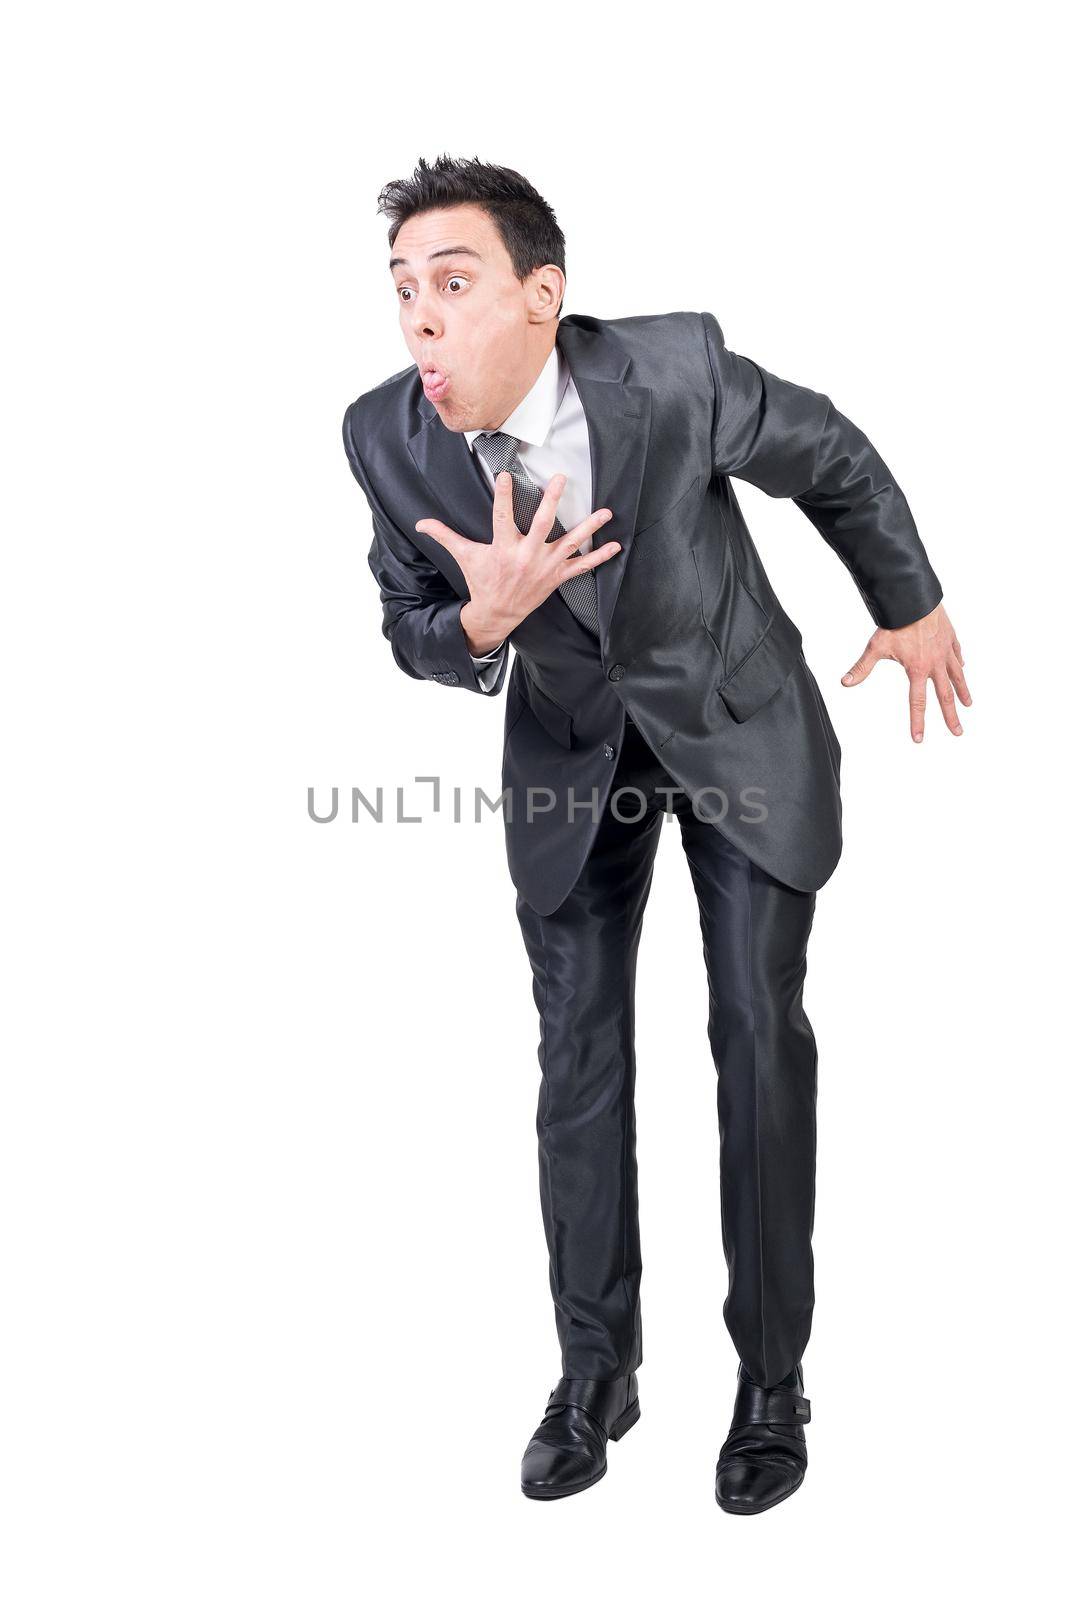 Full body of young male entrepreneur in classy suit with dark hair making grimace and vomit gesture against white background